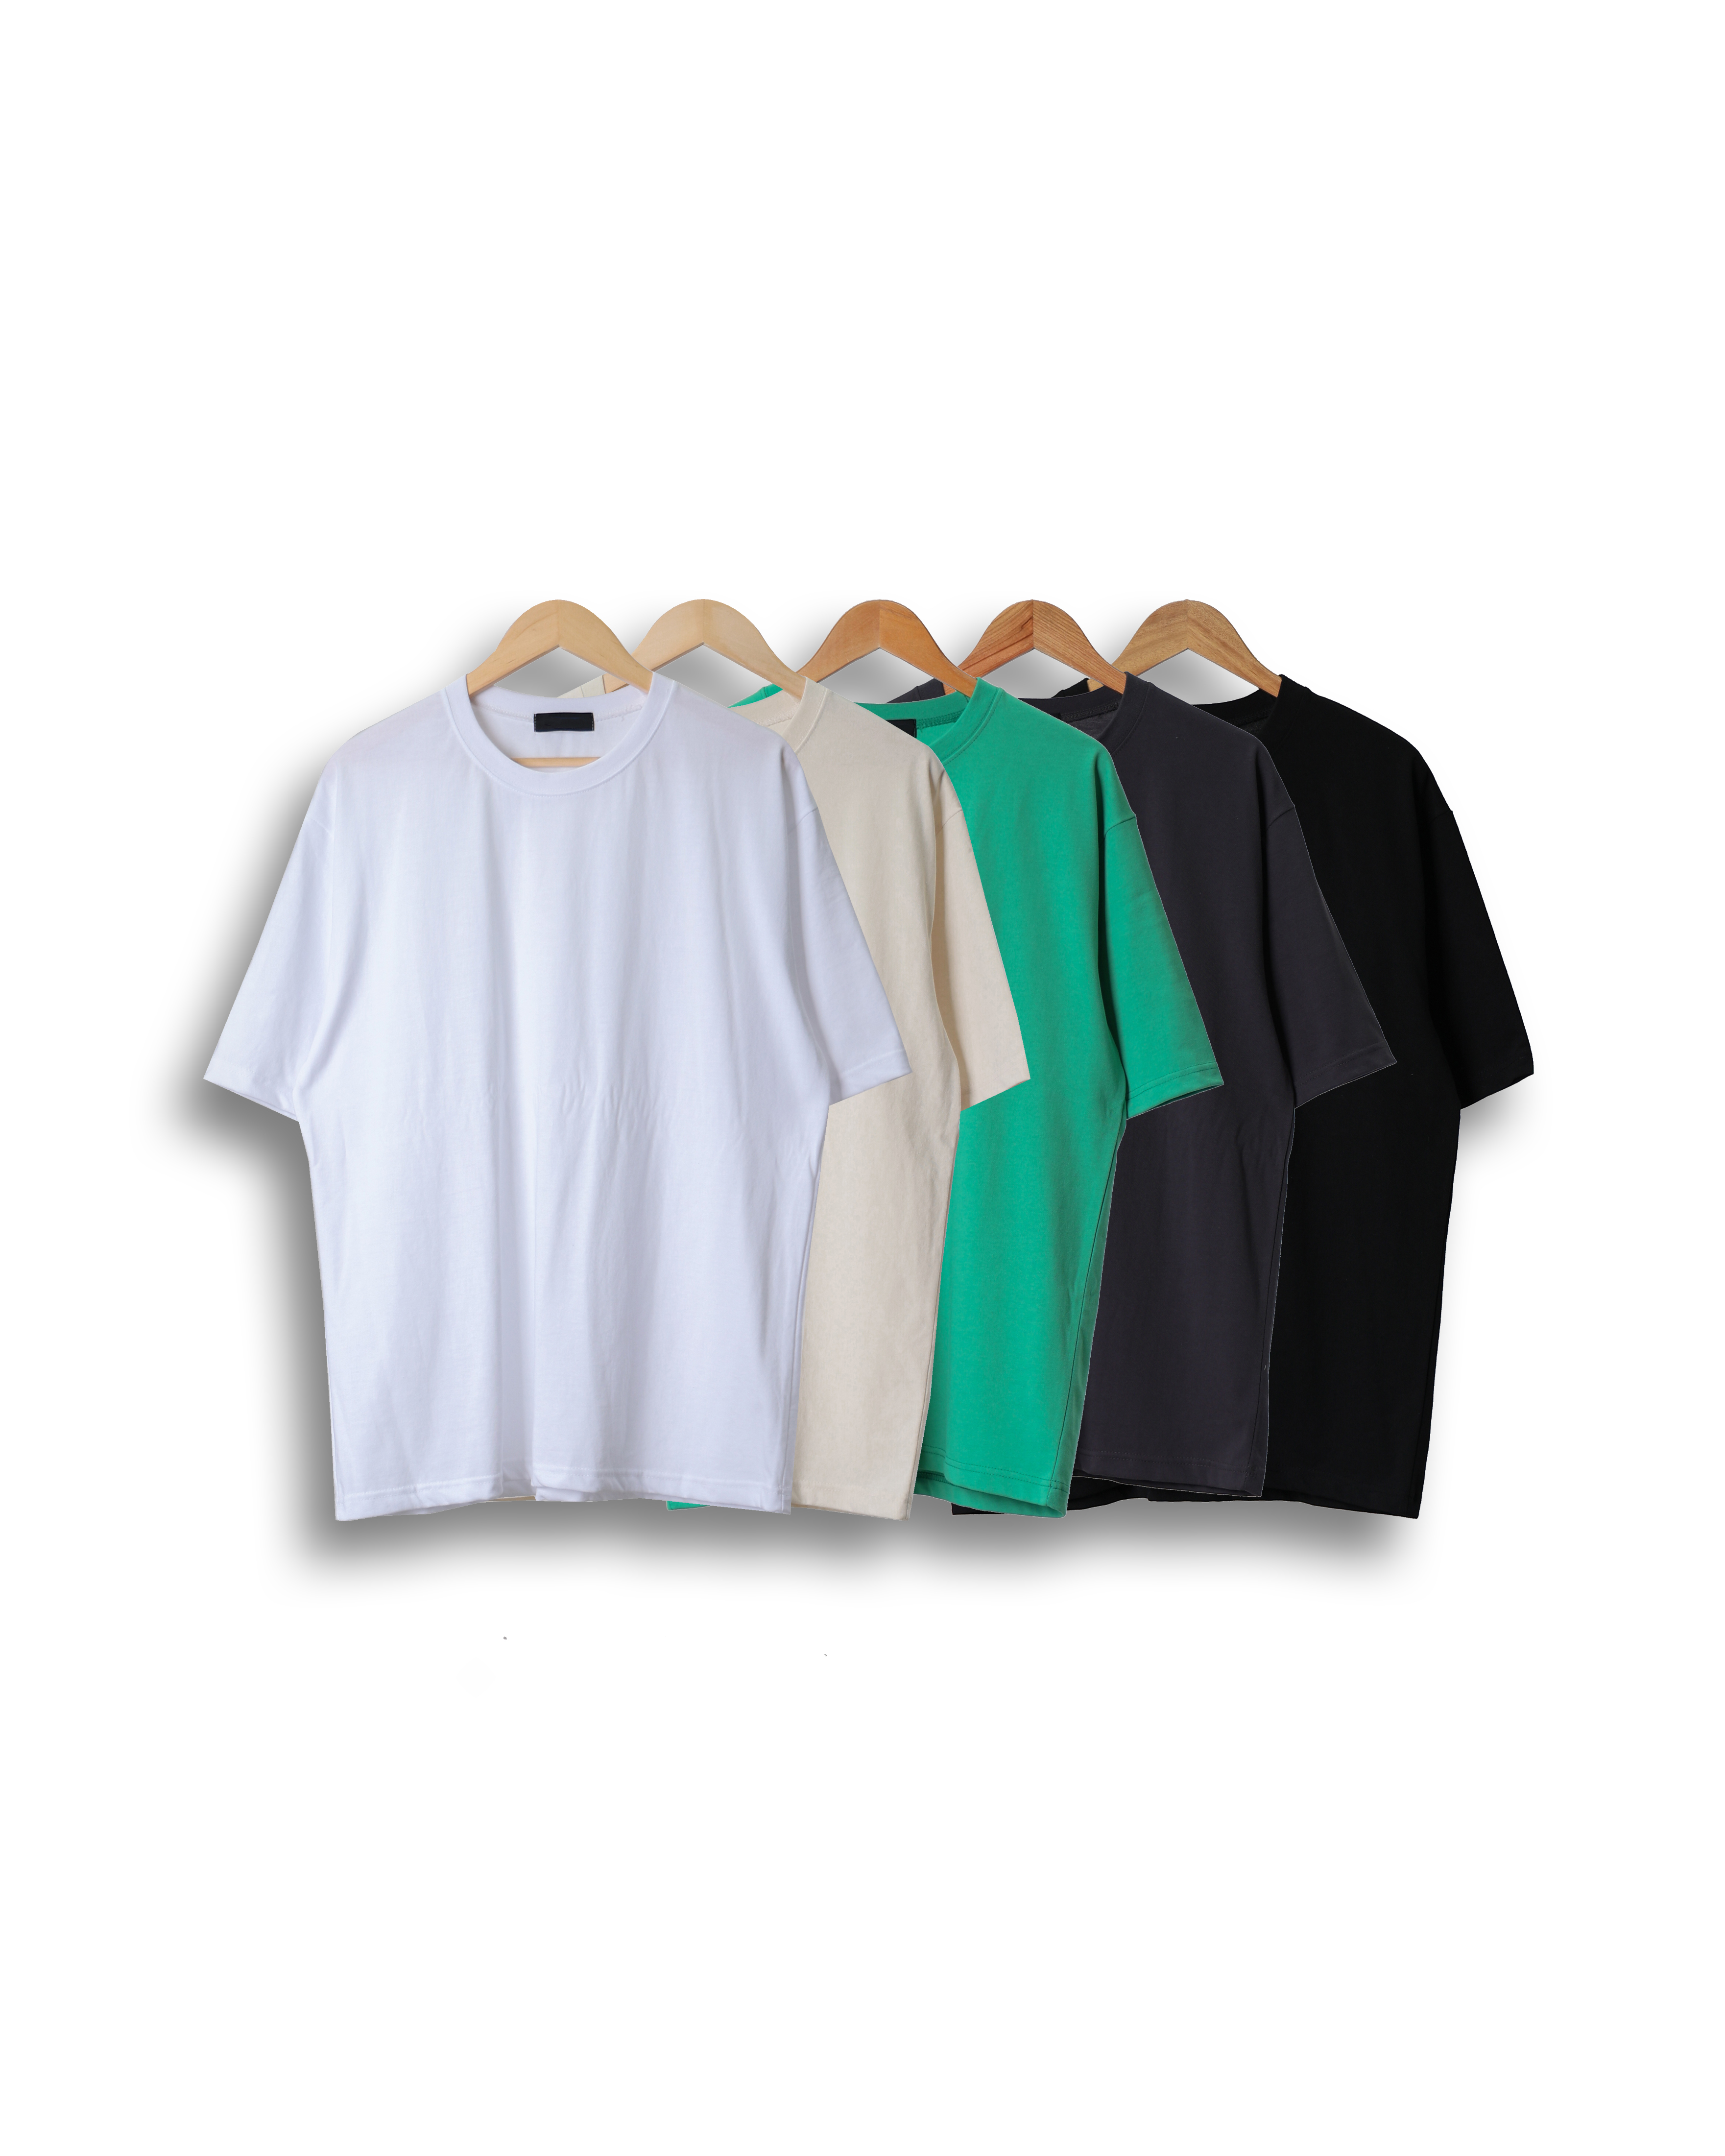 NOTICE Daily Layered Basic T Shirts (Black/Charcoal/Green/Light Beige/White)